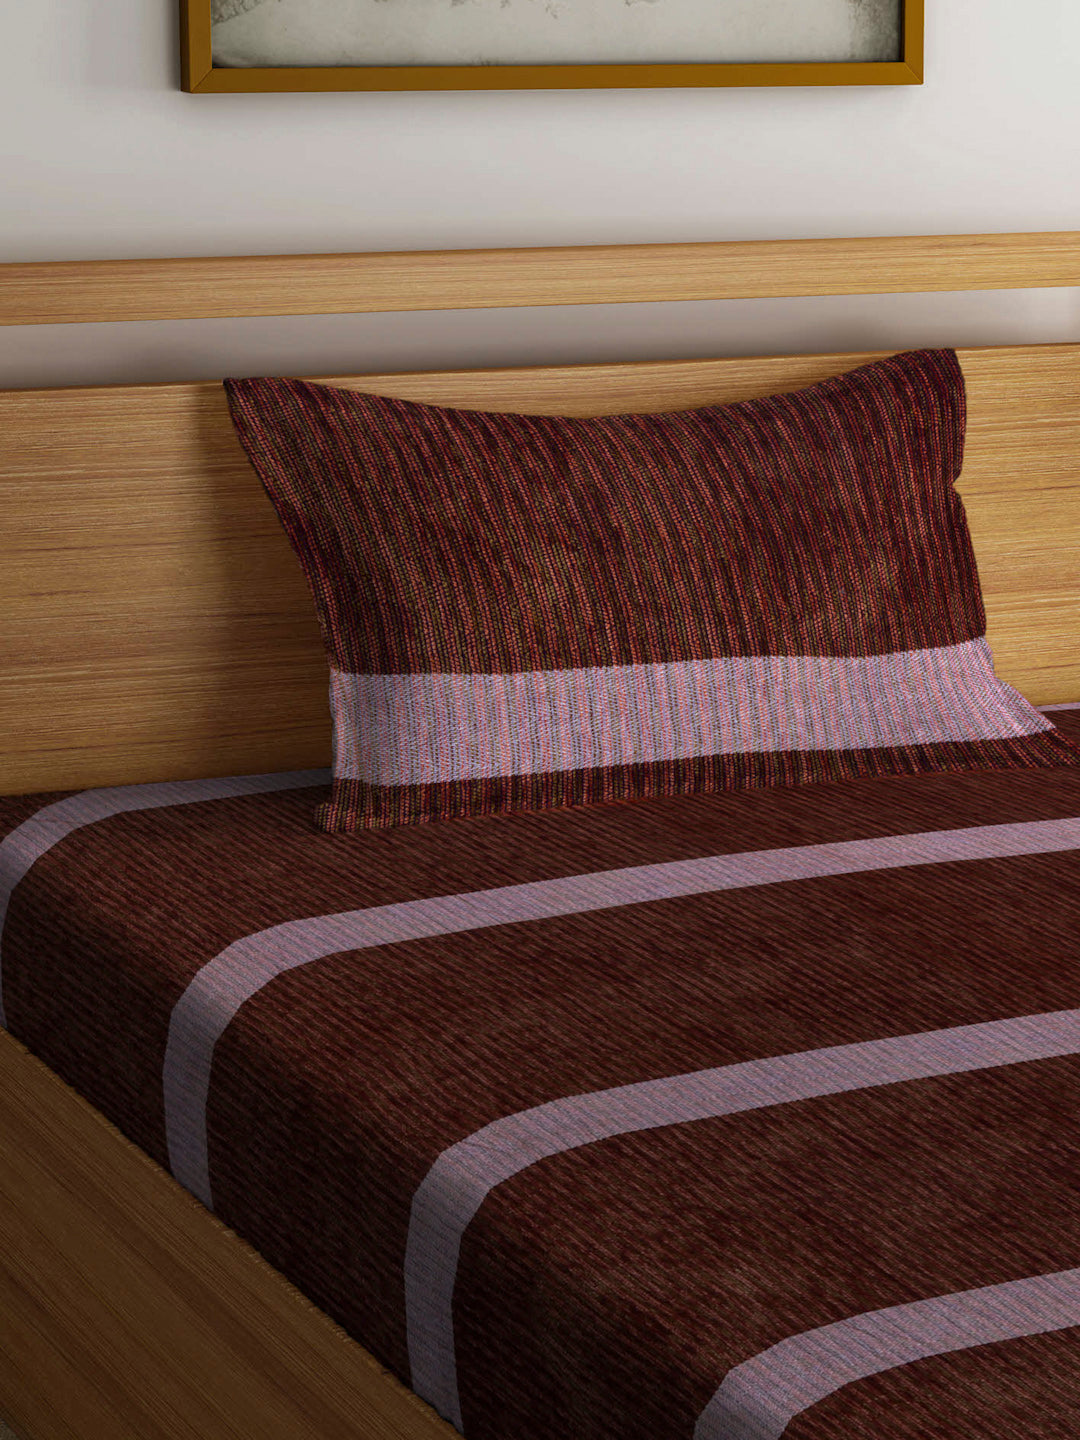 Arrabi Brown Stripes Handwoven Cotton Single Size Bedsheet with 1 Pillow Cover ( 225 X 150 cm)